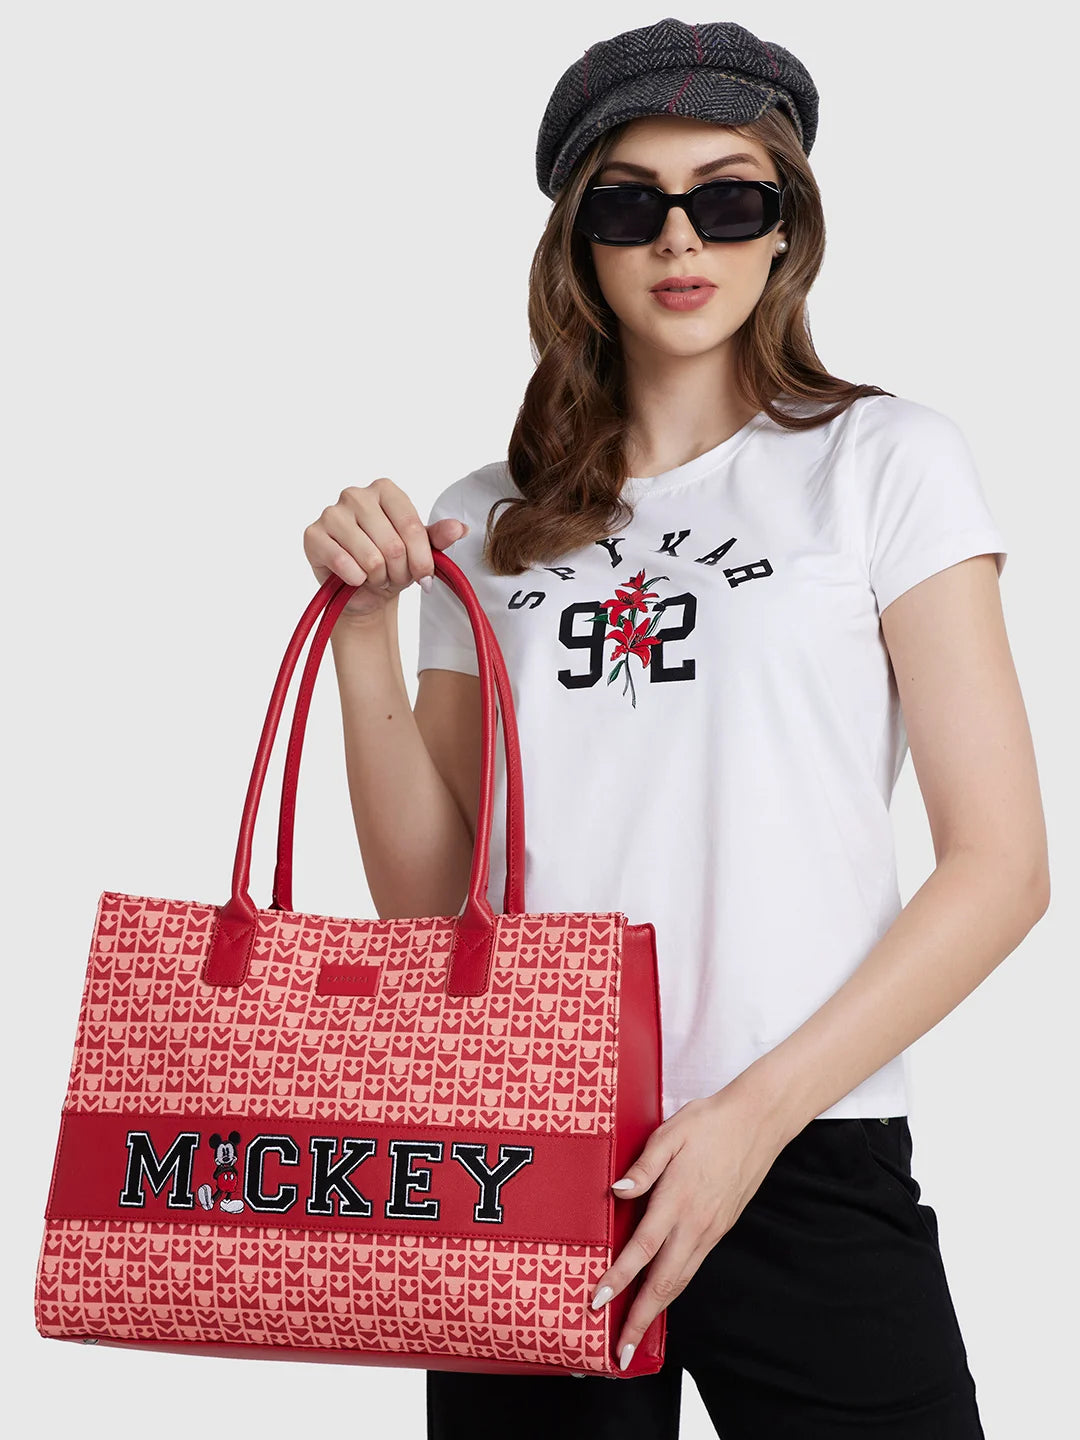 Caprese Disney Inspired  Graphic Printed Mickey Mouse Collection Tote Laptop Compatible Handbag